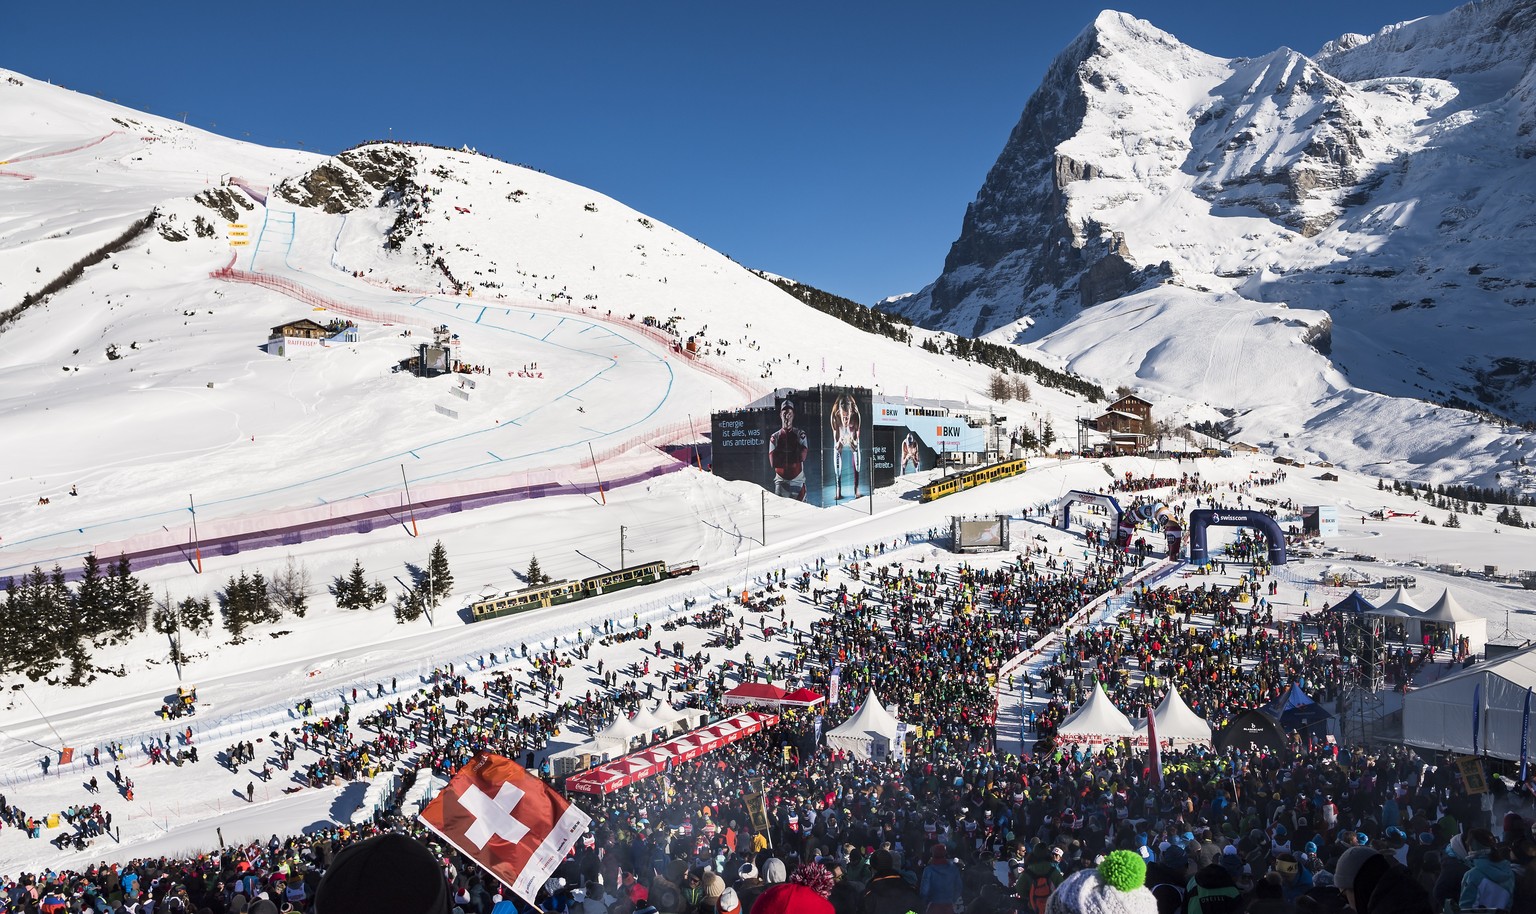 epa07300157 Spectators during the men&#039;s downhill race at the FIS Alpine Skiing World Cup in Wengen, Switzerland, 19 January 2019. On the right the Eiger mountain is seen. EPA/JEAN-CHRISTOPHE BOTT